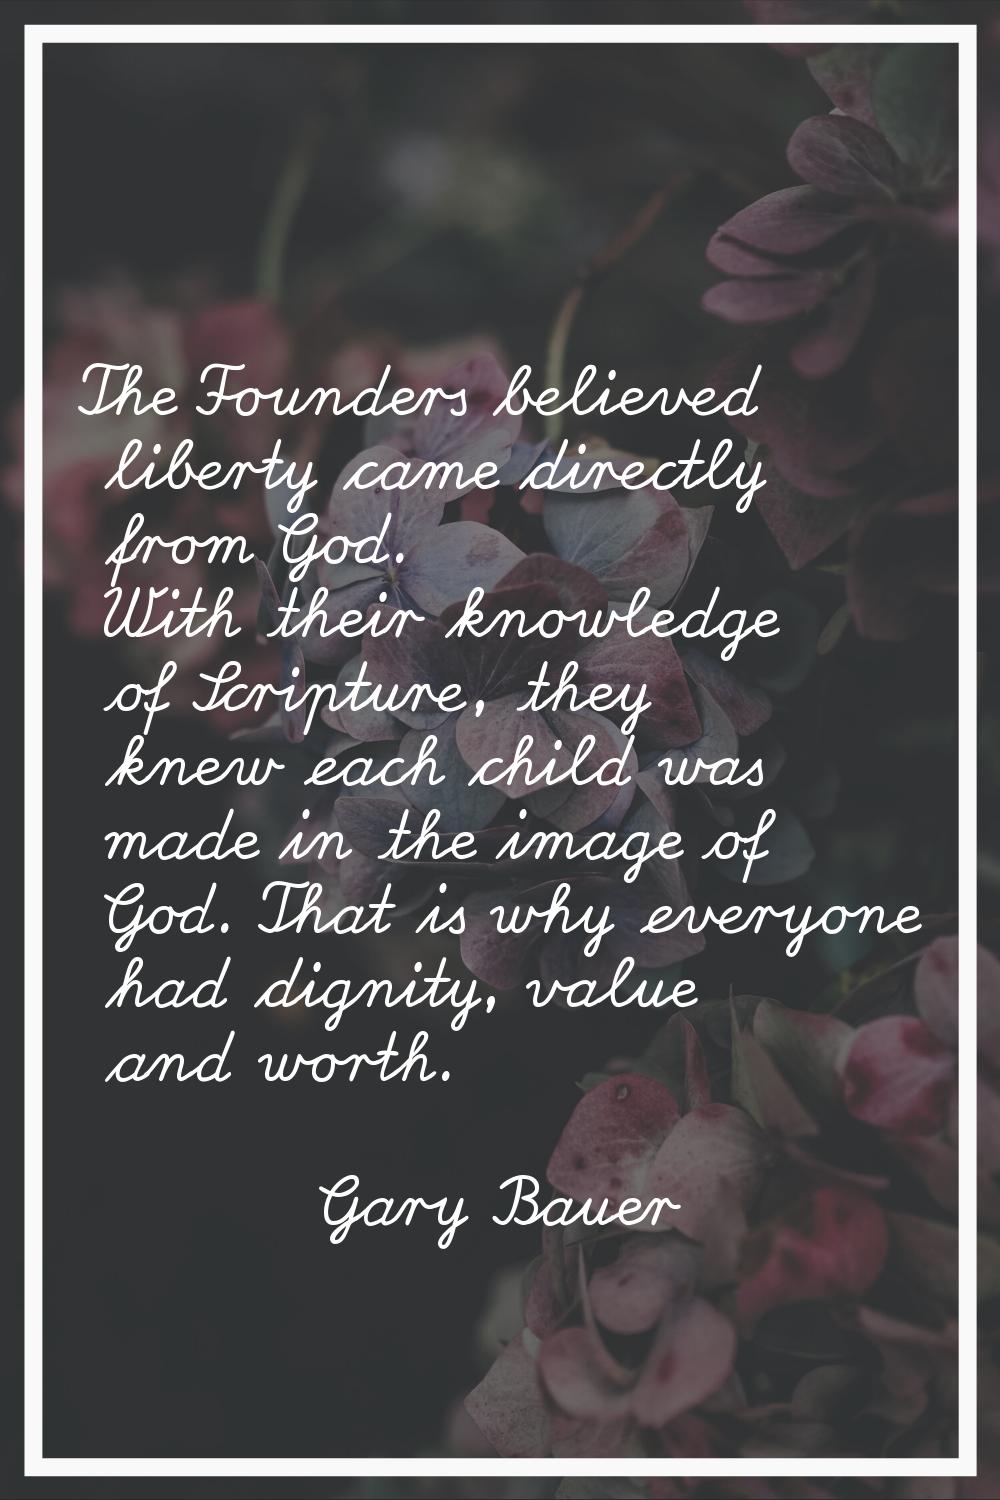 The Founders believed liberty came directly from God. With their knowledge of Scripture, they knew 